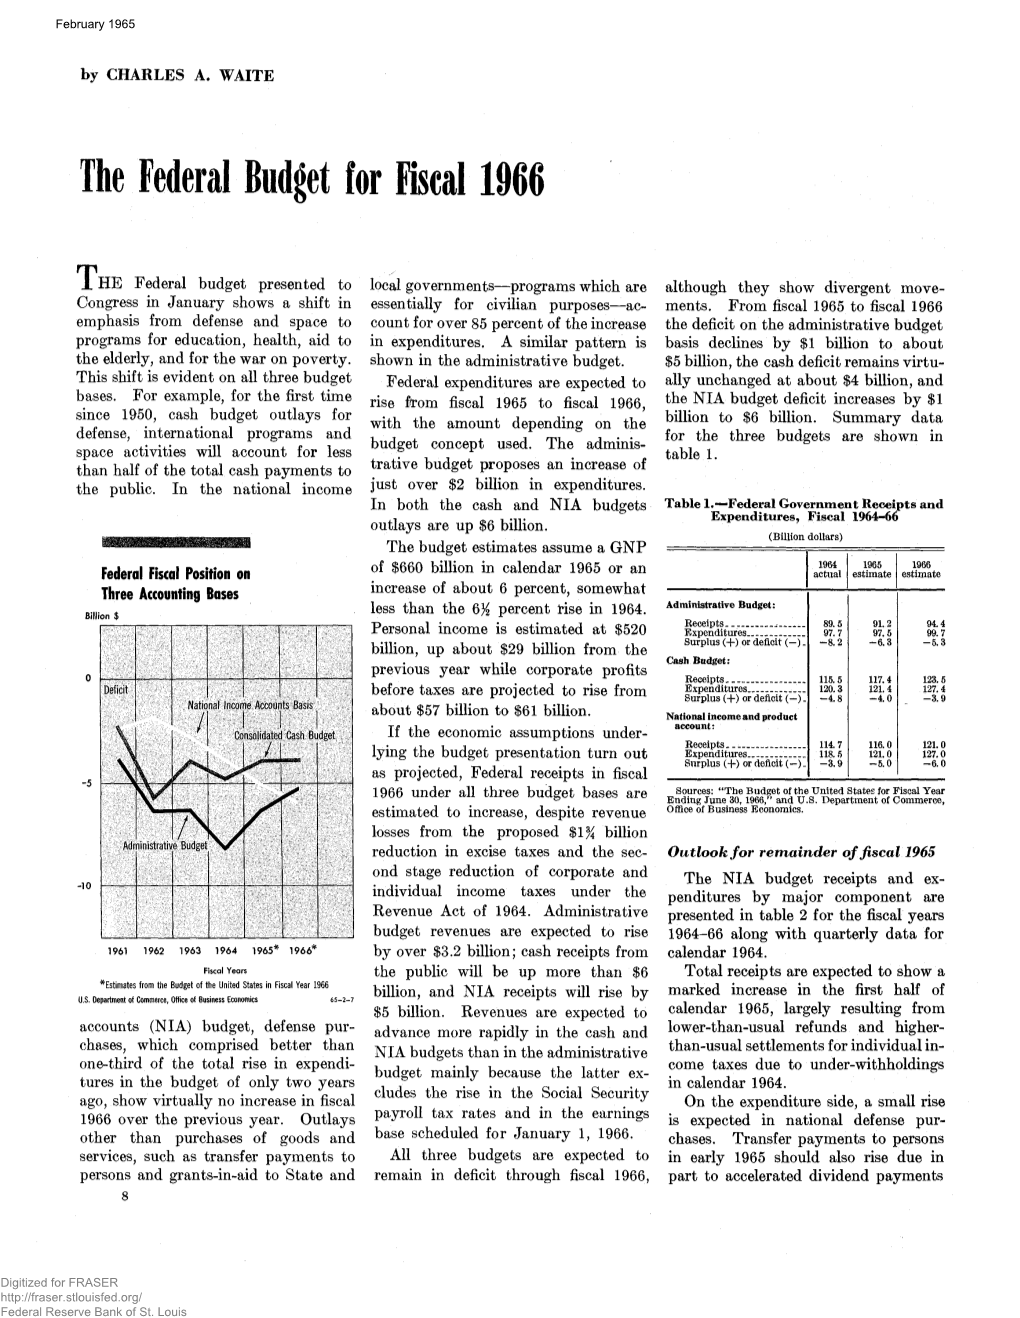 Federal Budget for Fiscal 1966